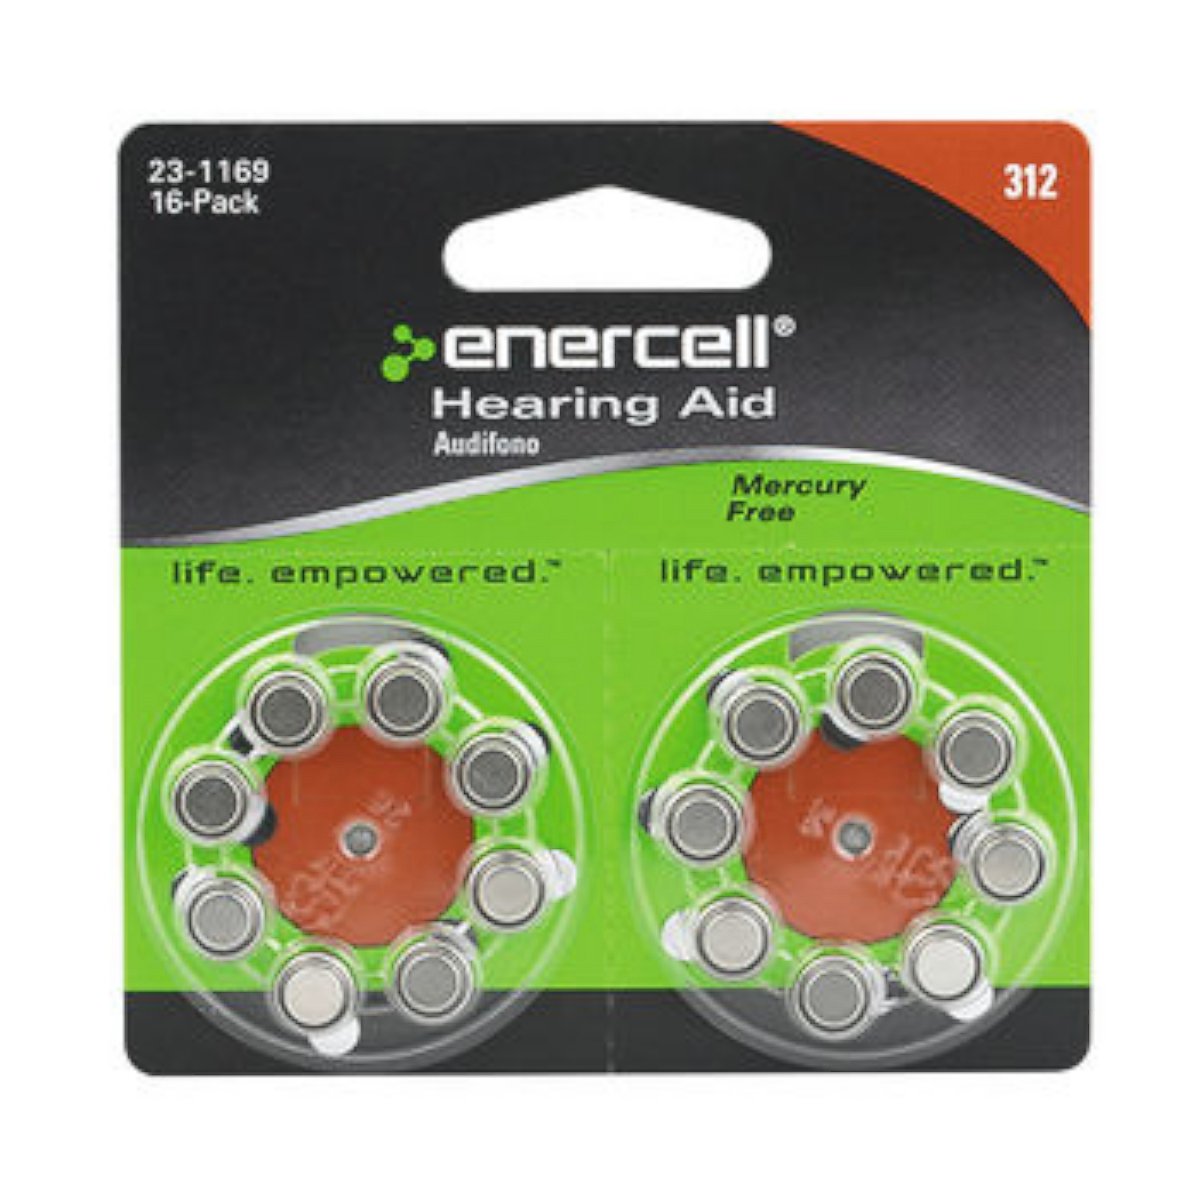 PHOTO: This is a photo of Enercell hearing aid batteries that are for sale on Radioshack's web site. 